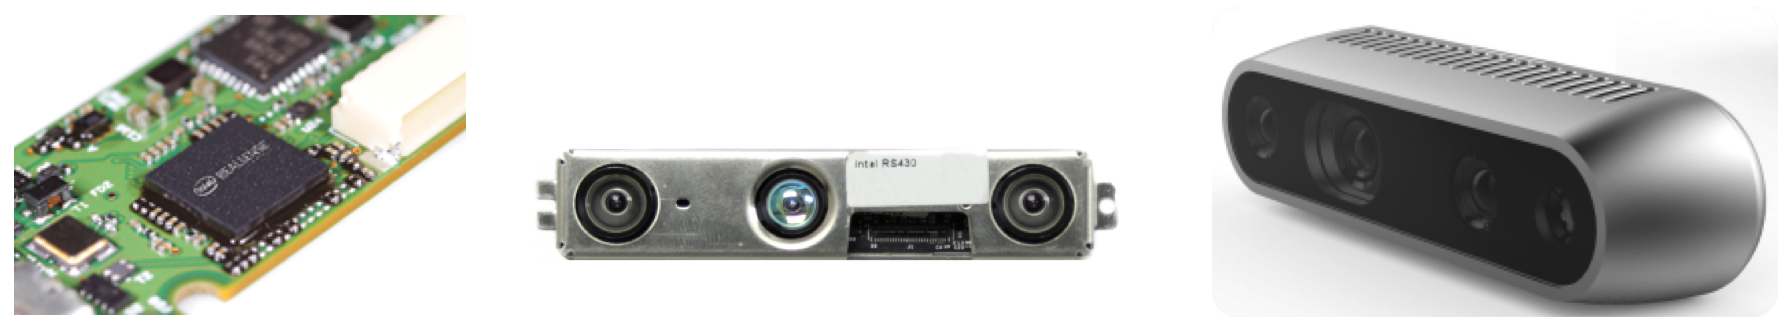 Figure 8. 
LEFT: Intel RealSense D4m vision processor. 
MIDDLE: Example of one of the Intel RealSense D4xx series depth modules encased in a steel case. 
RIGHT: Intel RealSense USB3 Depth Camera D435.